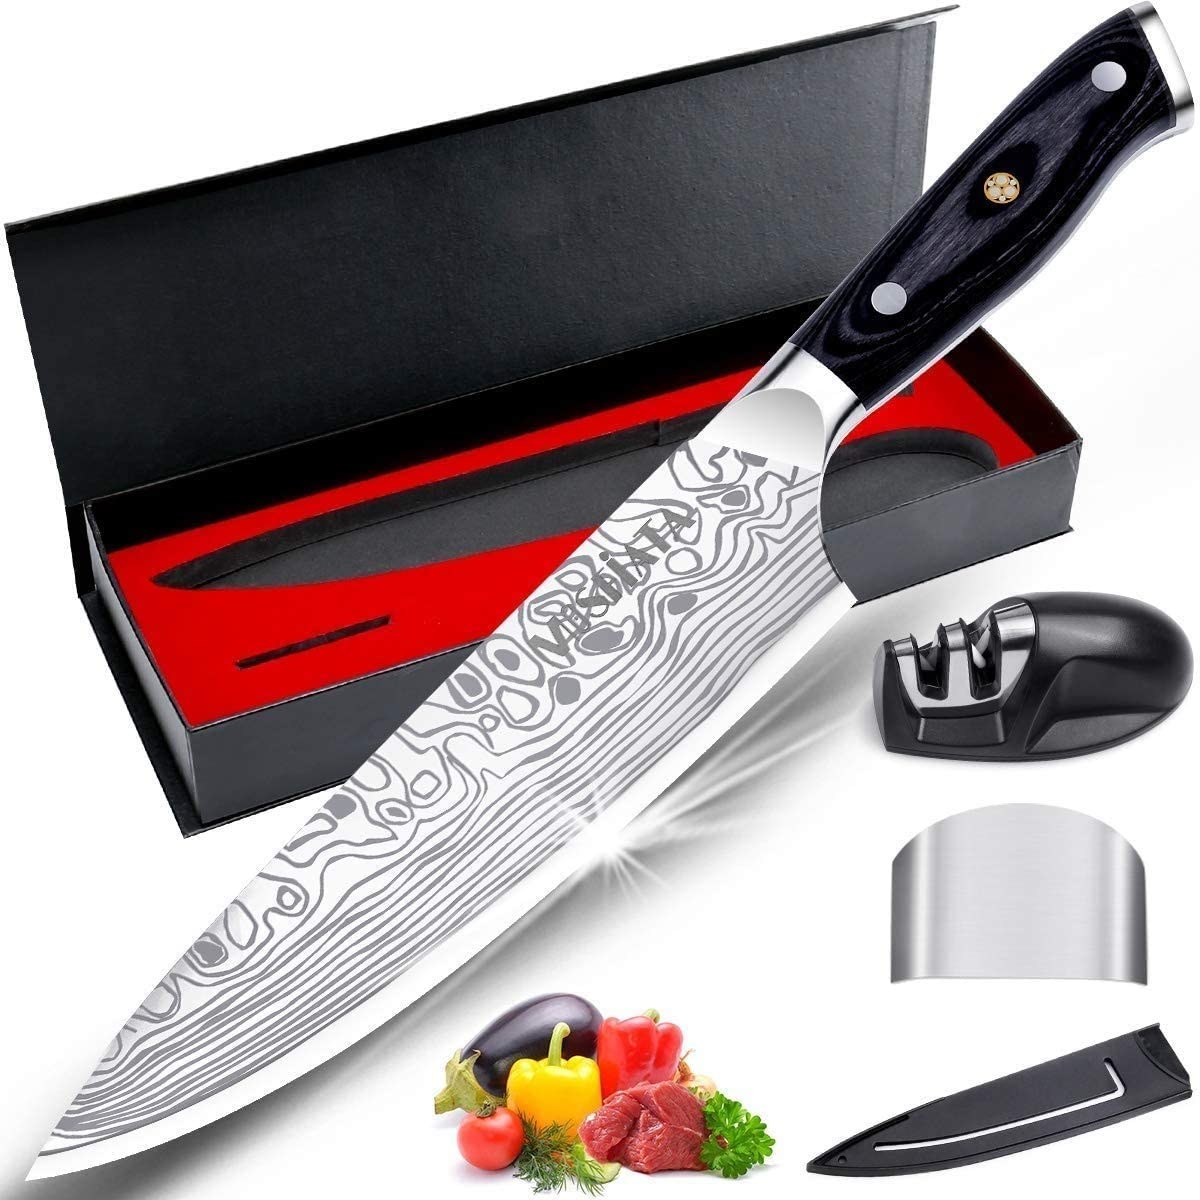 the large chef&#x27;s knife with a black swirly design on the silver blade, the gift box, knife sharpener, and cover